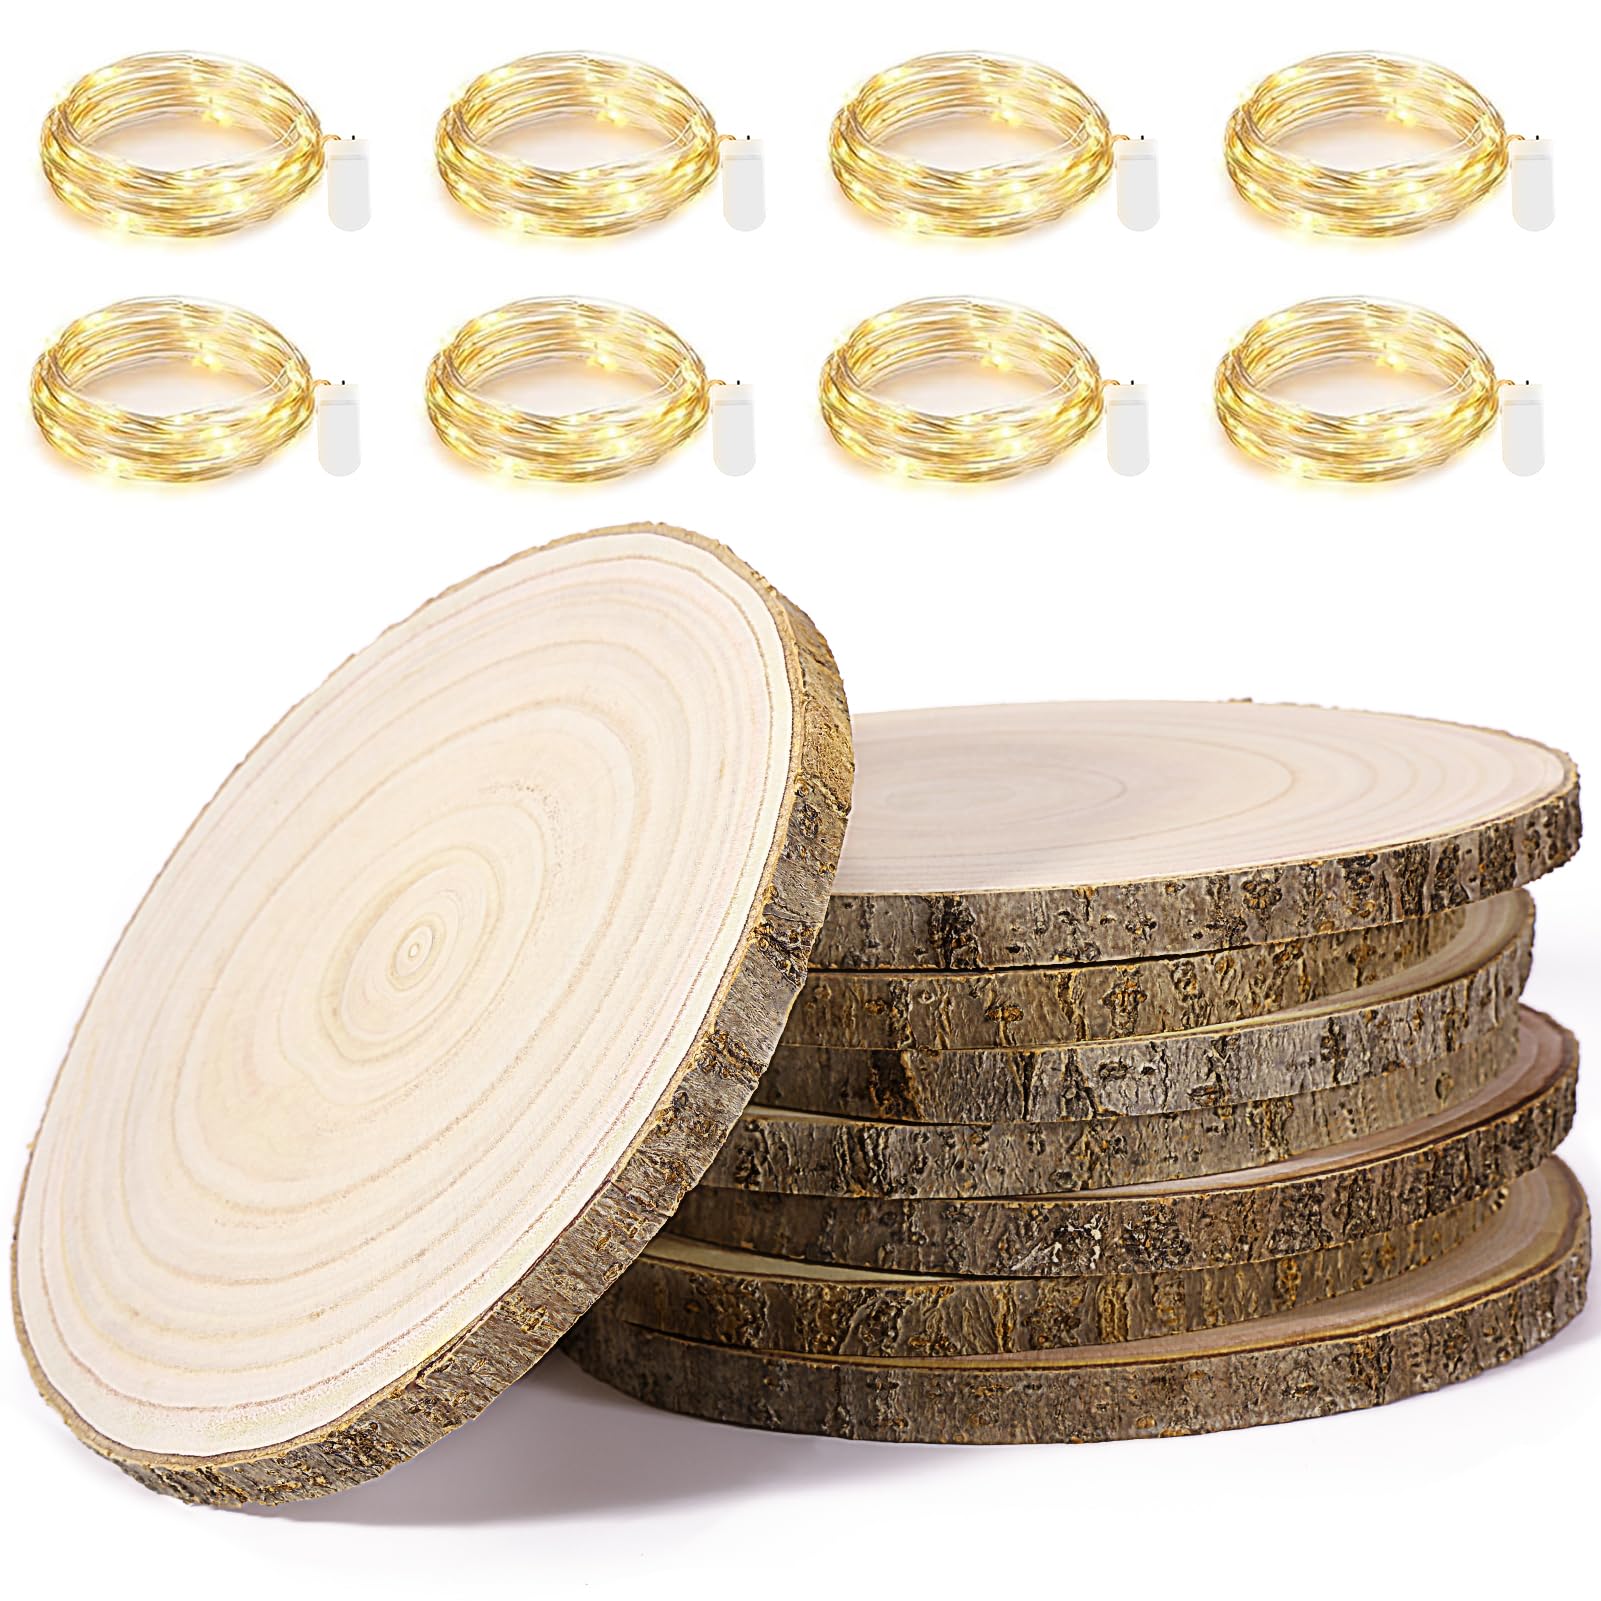 Pllieay 8Pcs 12-13 Inch Wood Slices, Natural Wood Slices for Centerpieces  Large Unfinished Round Wood Pieces for Ornaments, Wood Circles for Wedding